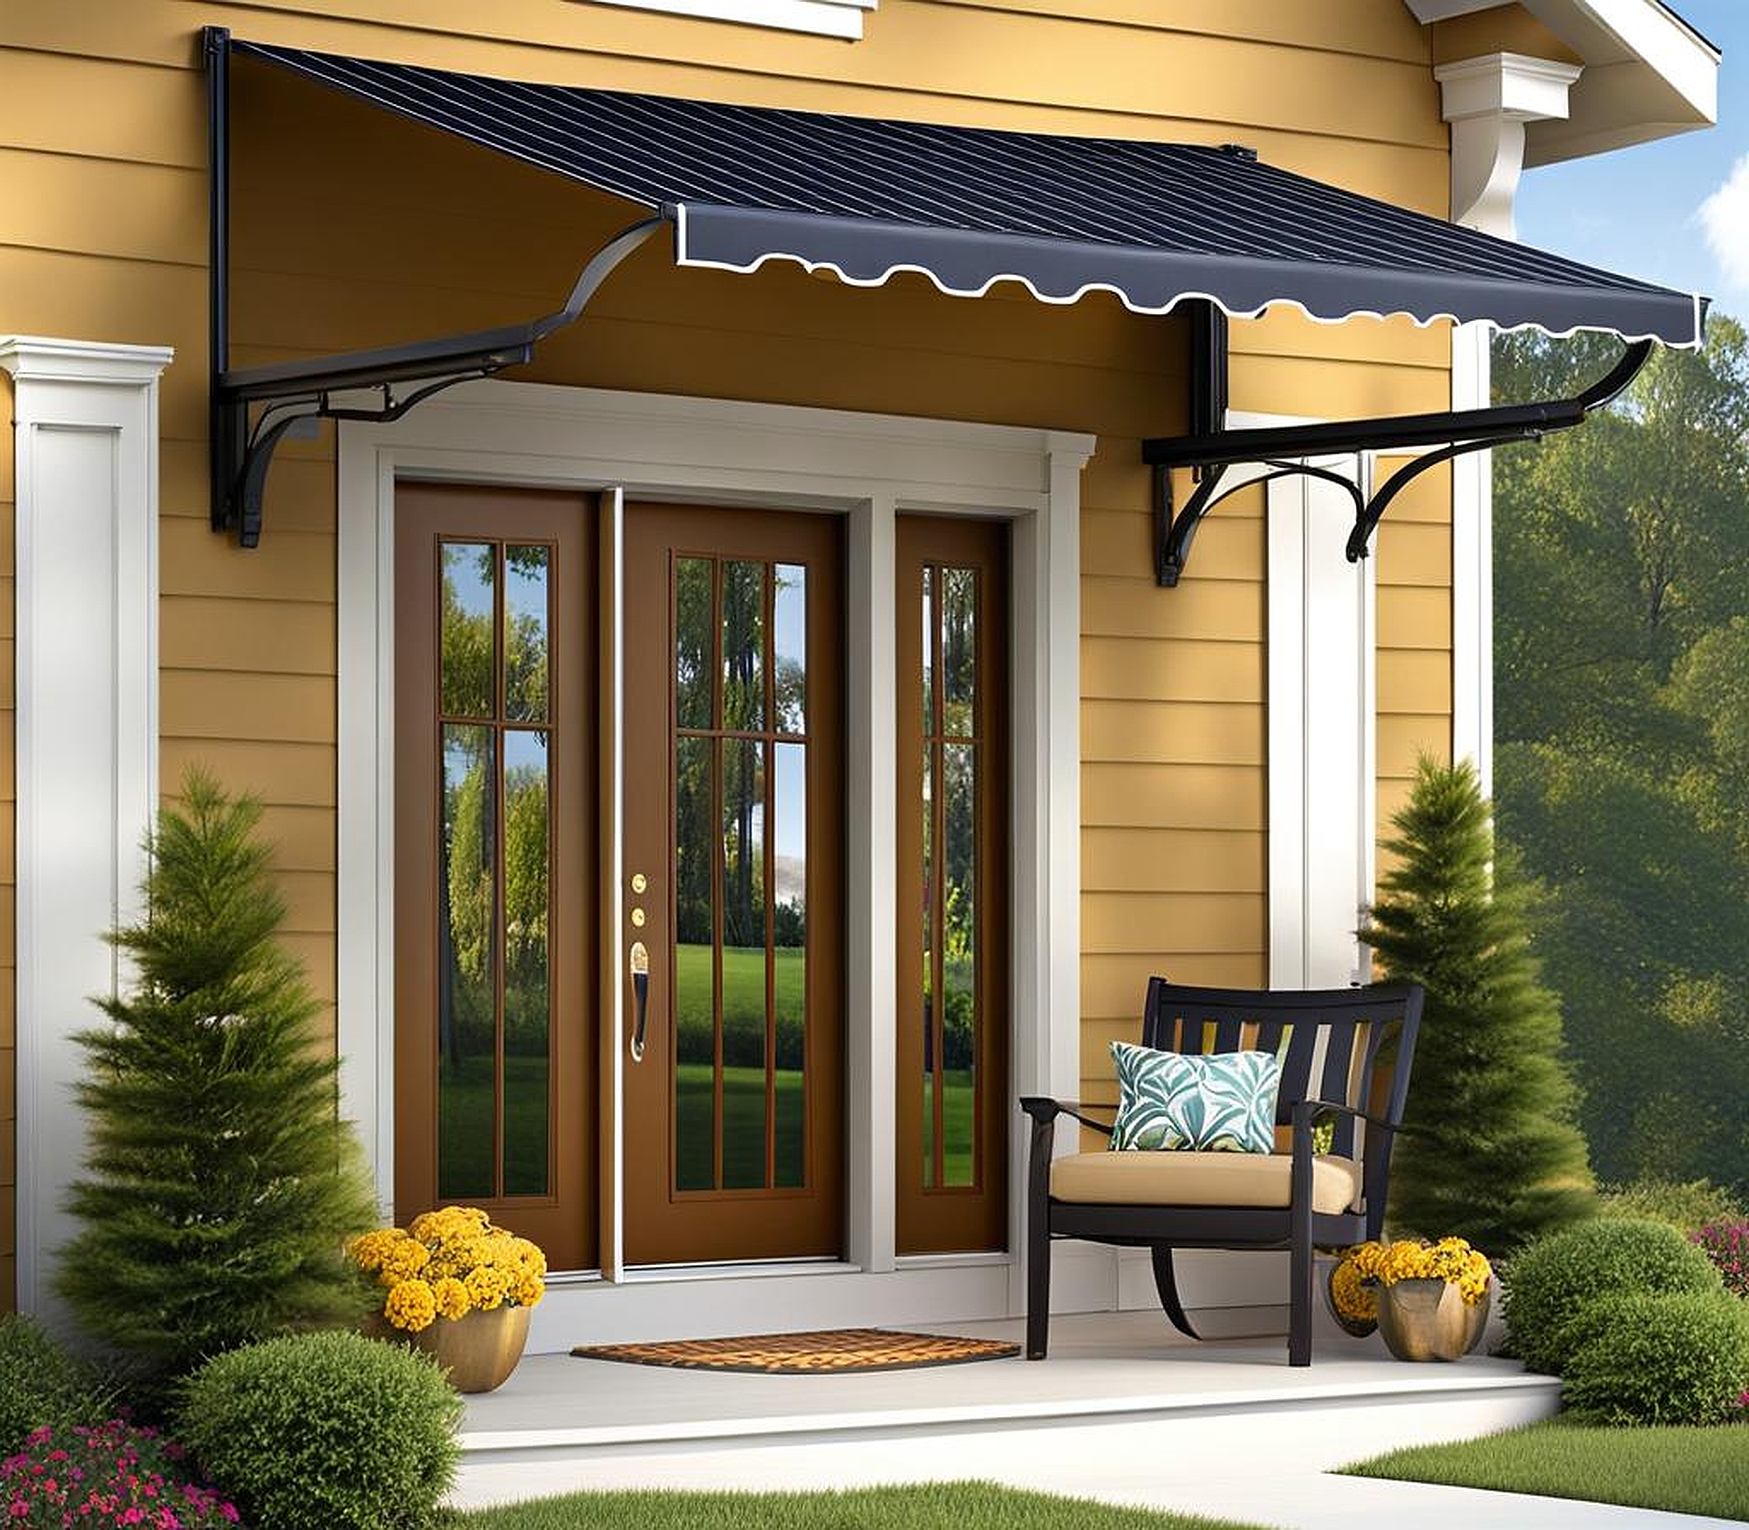 Metal Front Porch Awnings Add a Touch of Elegance to Your Home Exterior Design